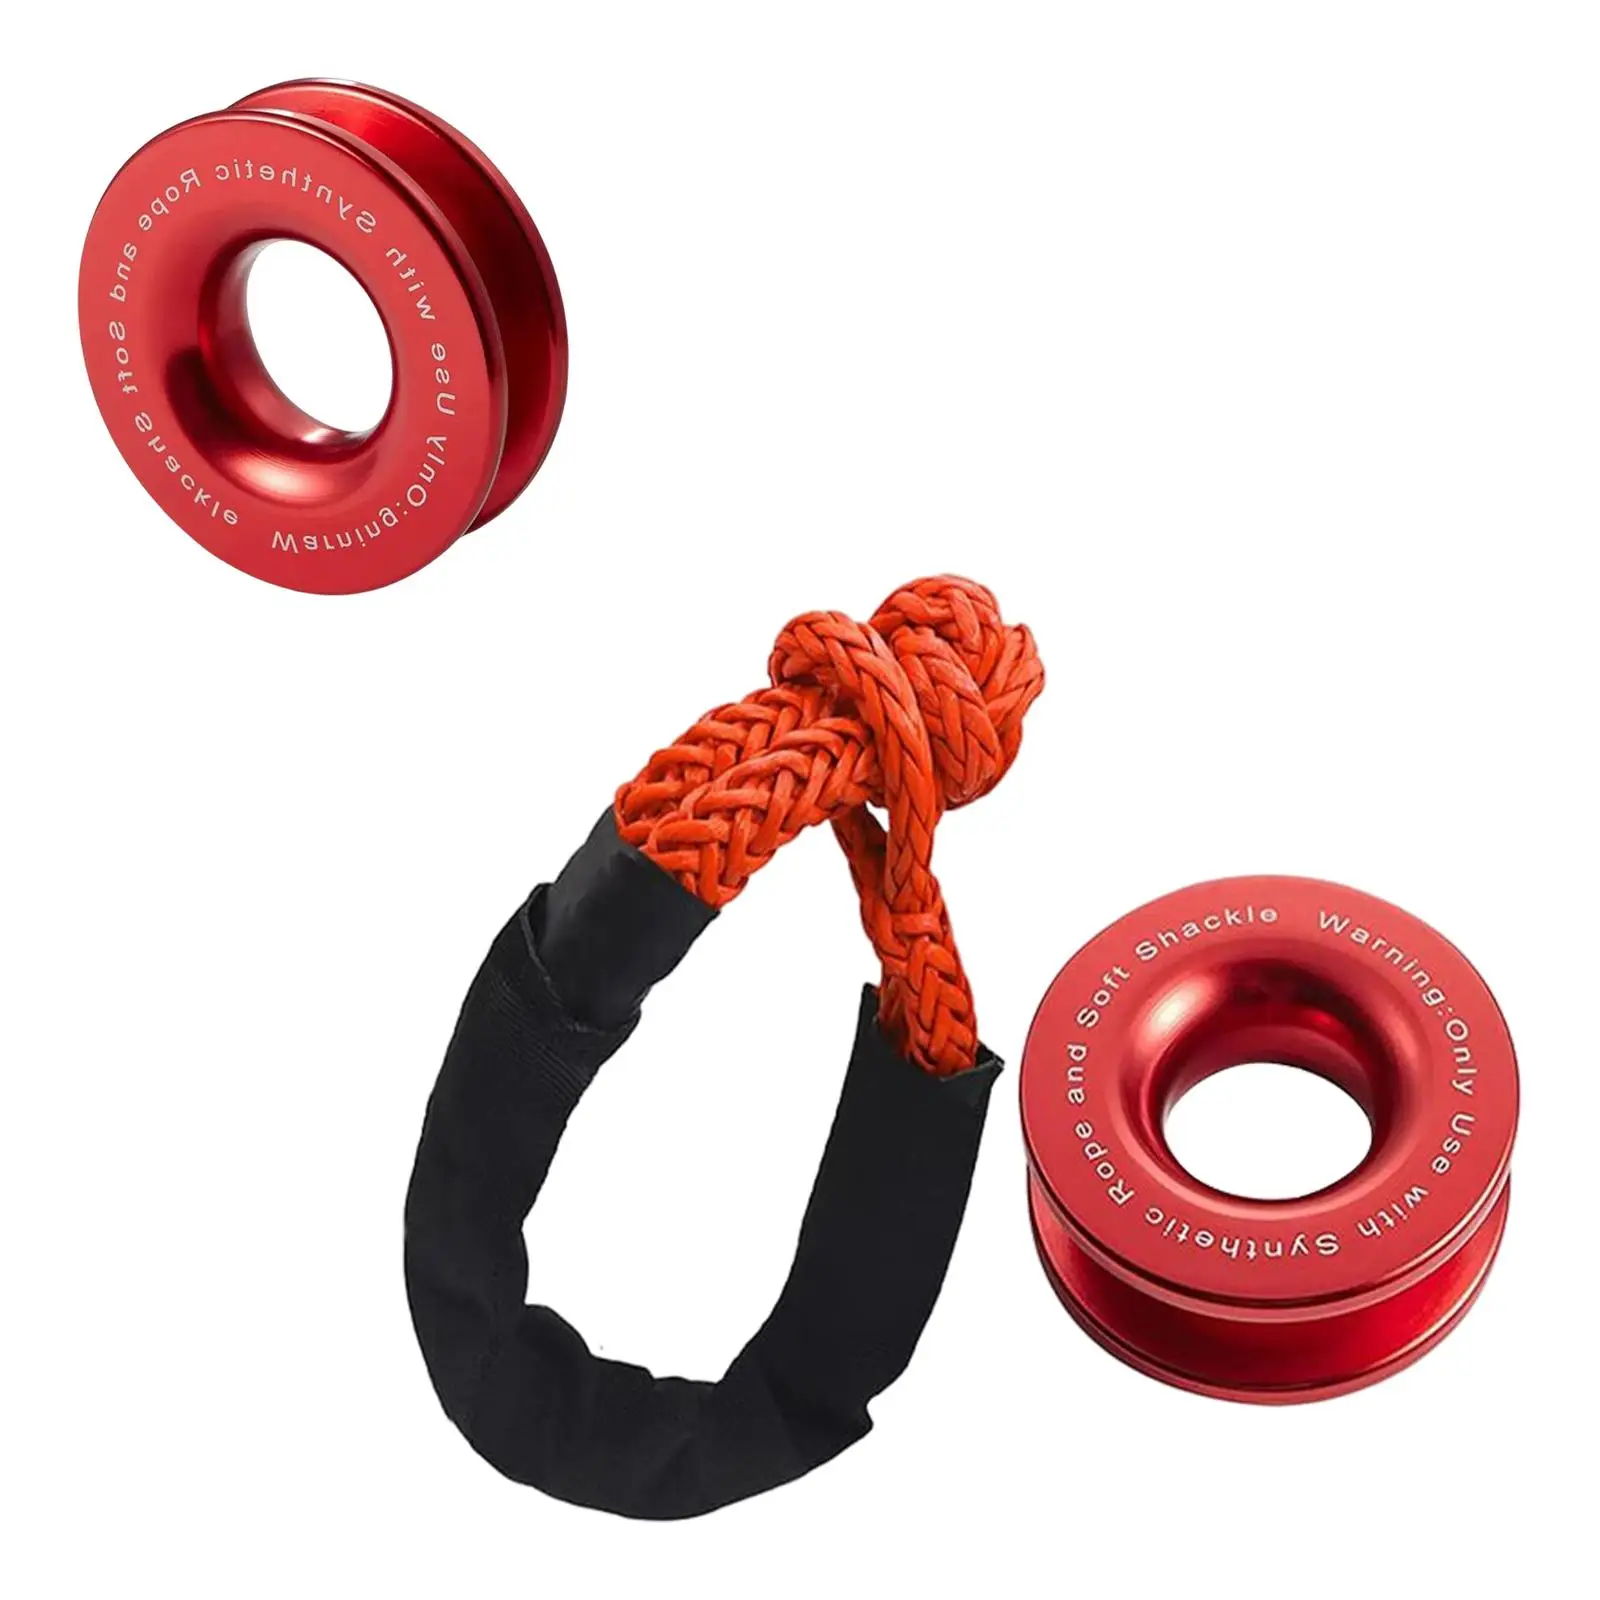 Winch Snatch recover Ring 55000lbs Vehicles Towing Durable Car Breakdowns Soft Shackle Depot for Cars Boat Marine